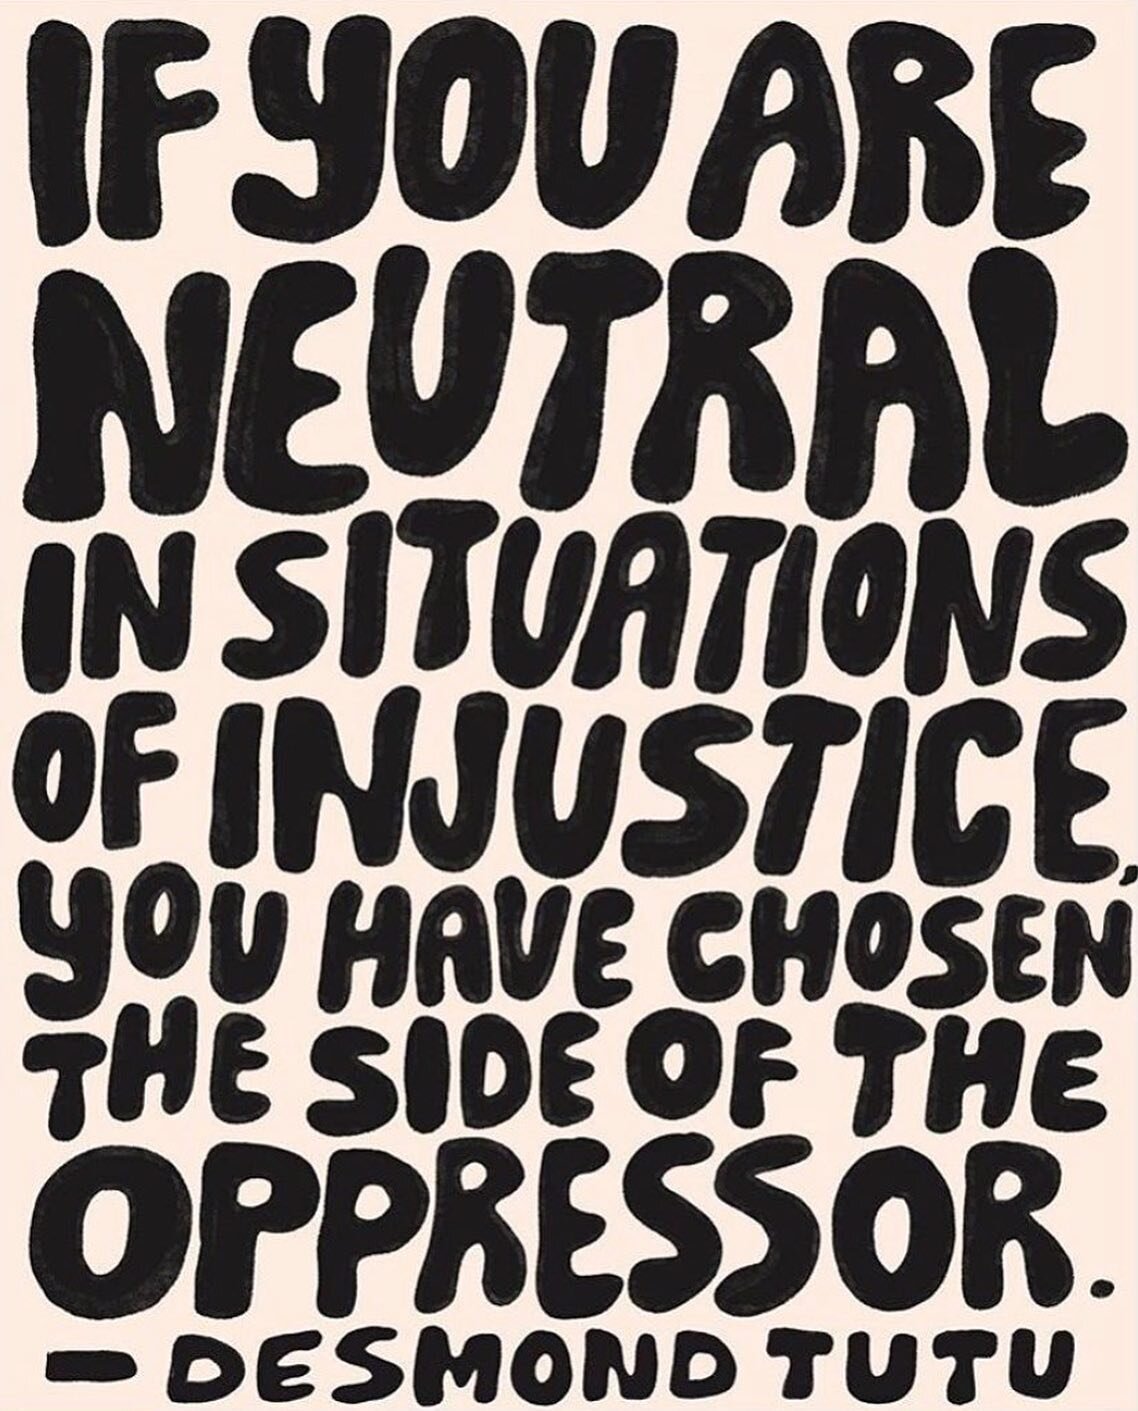 &quot;If you are neutral in situations of injustice, you have chosen the side of the oppressor.&quot; - Desmond Tutu. (Artwork by @stuffgracemade)

We cannot be silent. We have the power &mdash; to speak out, to educate ourselves and those around us.